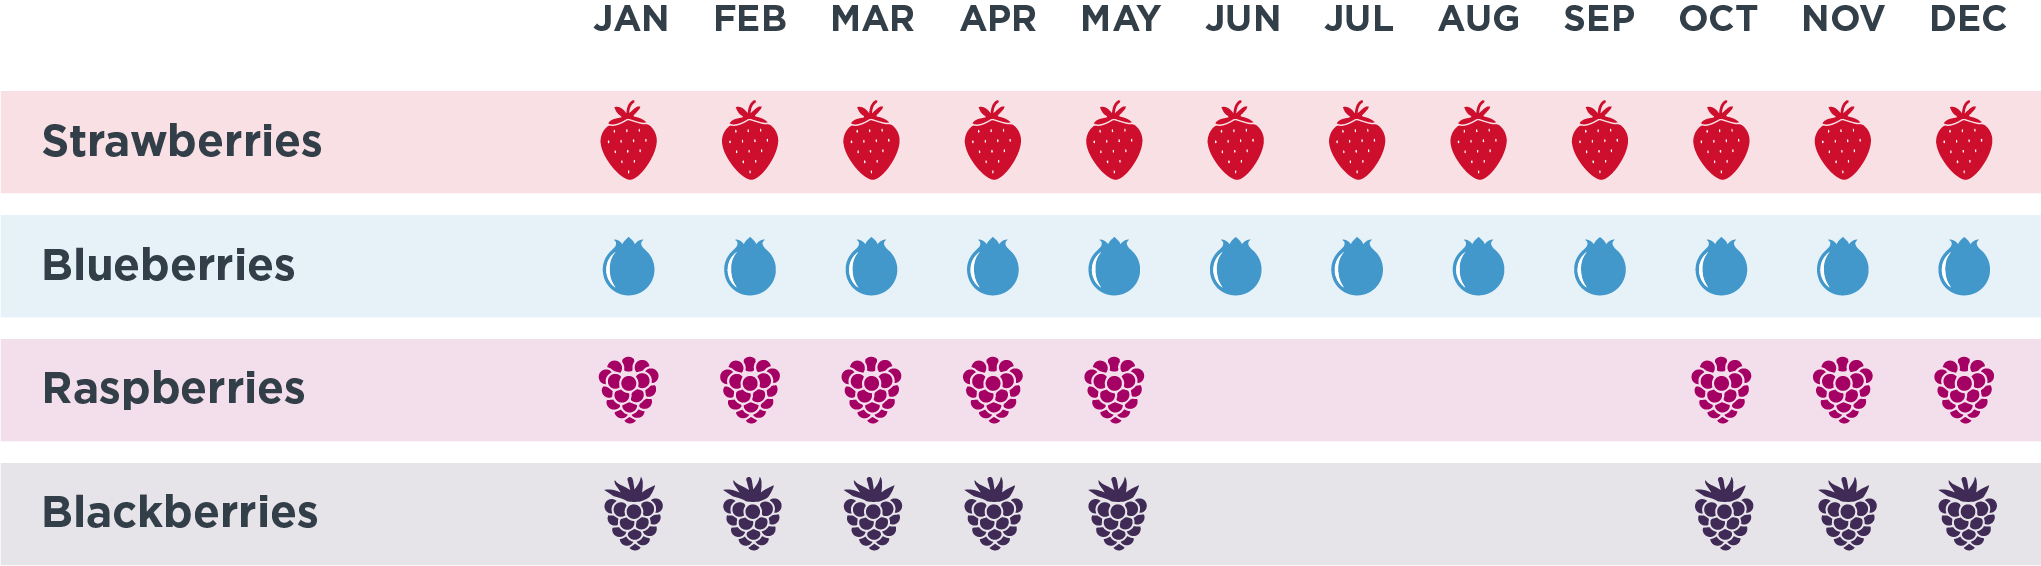 Chart showing organic berry availability